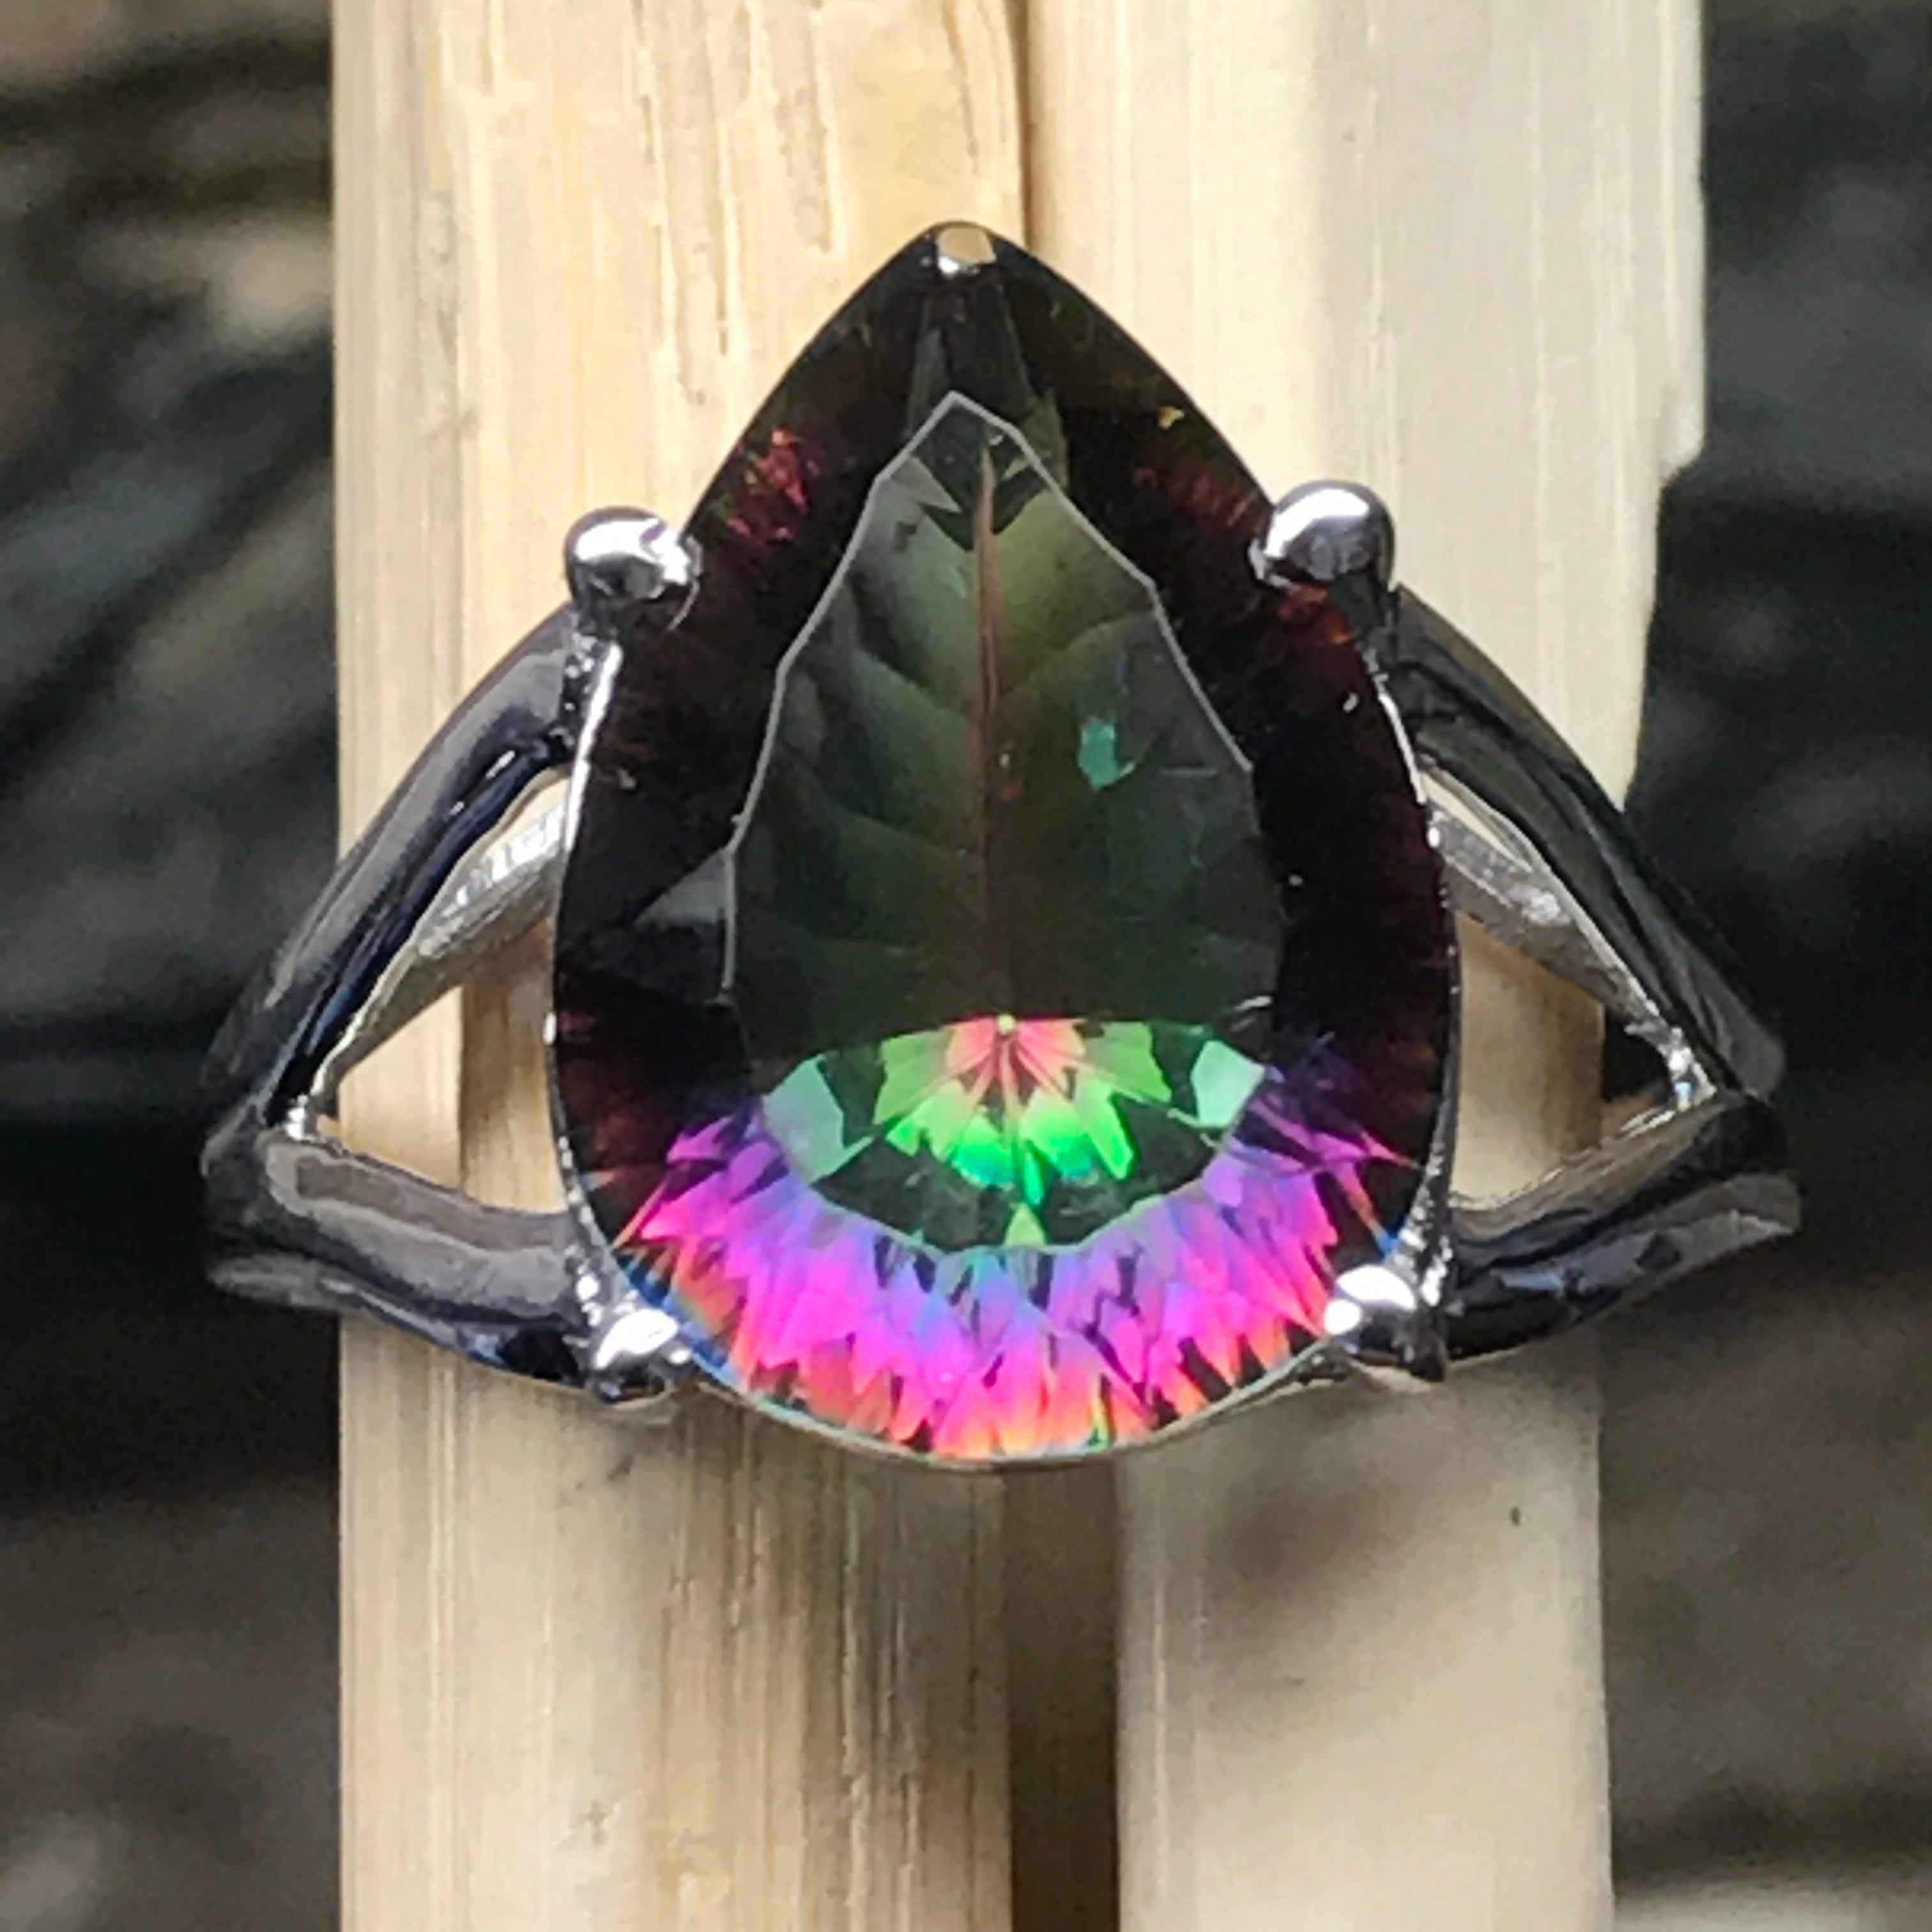 Beautiful 2.5ct Mystic Topaz 925 Solid Sterling Silver Ring Size 6, 7, 8, 9 - Natural Rocks by Kala